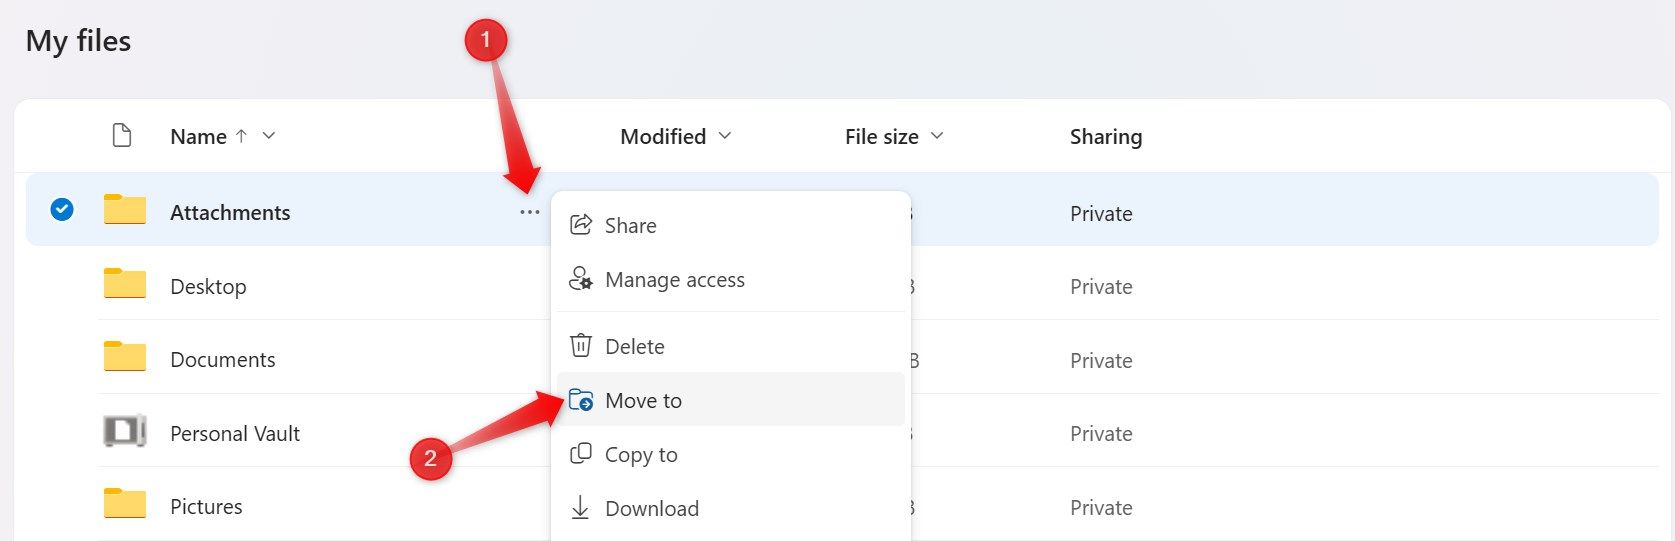 Moving existing files from the My Files folder to Personal Vault in OneDrive.